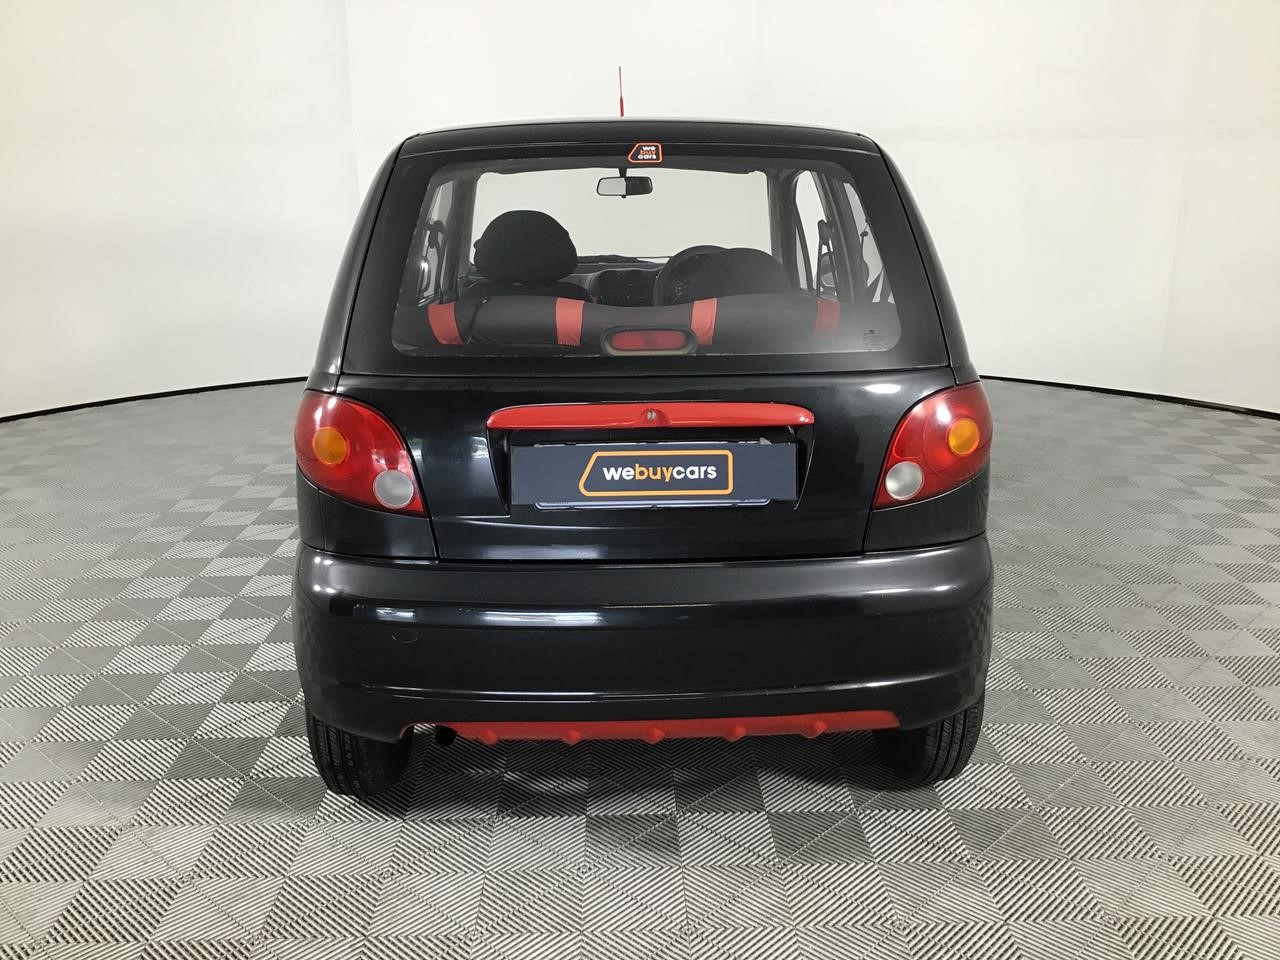 Used 2005 Chevrolet Spark 5Door for sale WeBuyCars